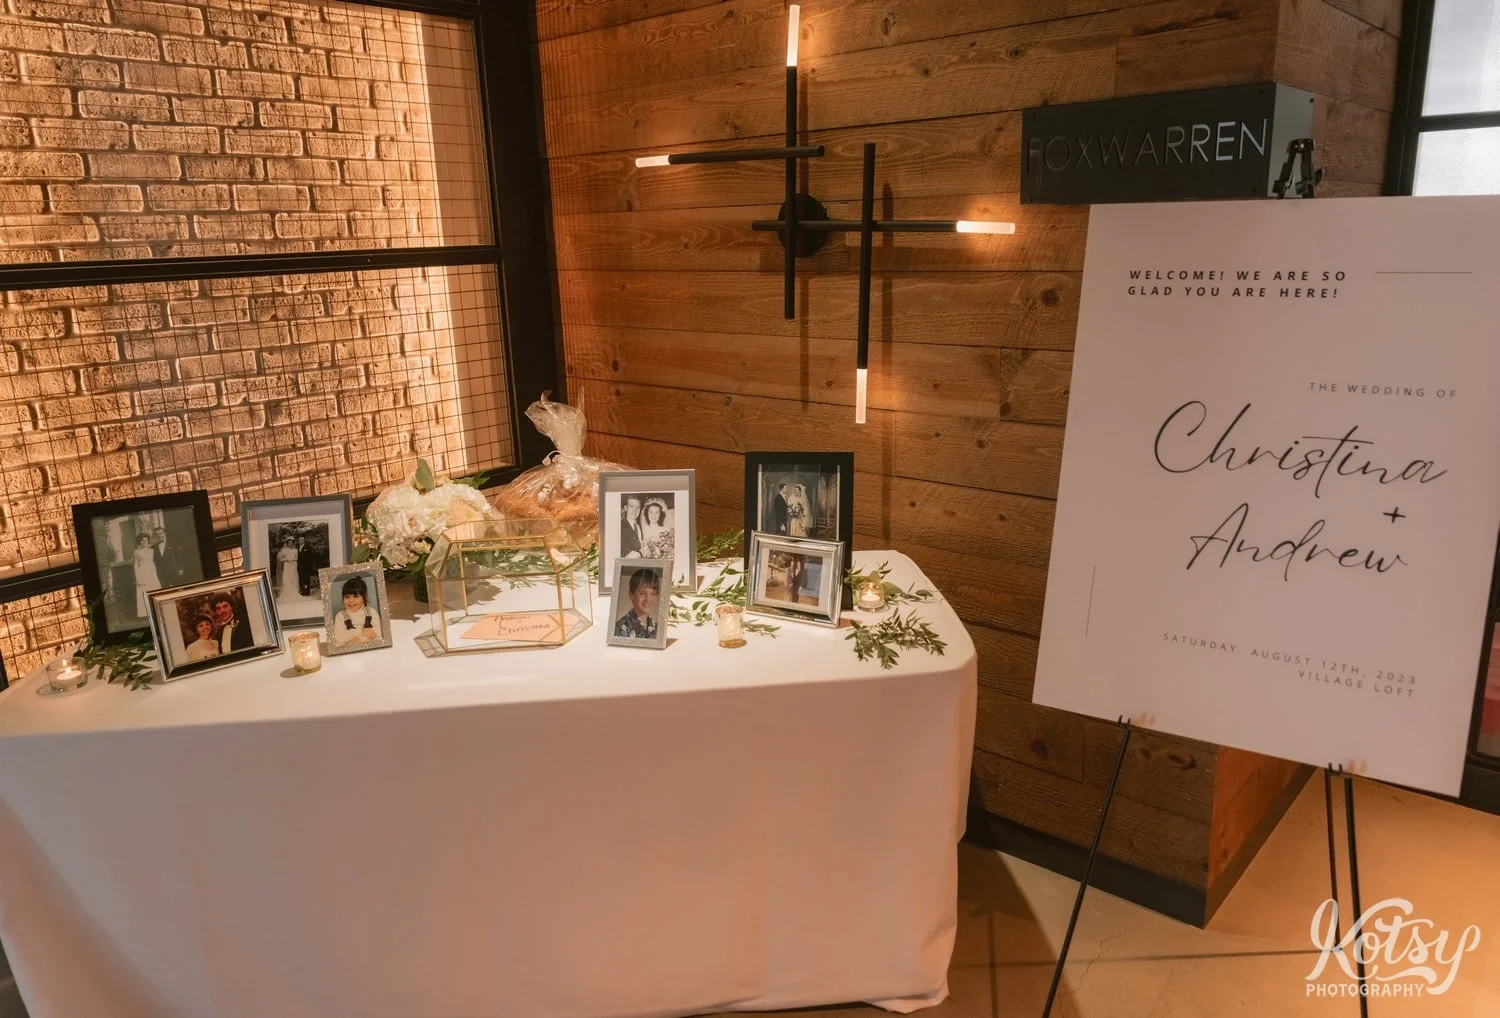 A sign reading "the wedding of Christina & Andrew" is seen next to a table of photos of the bride and groom.